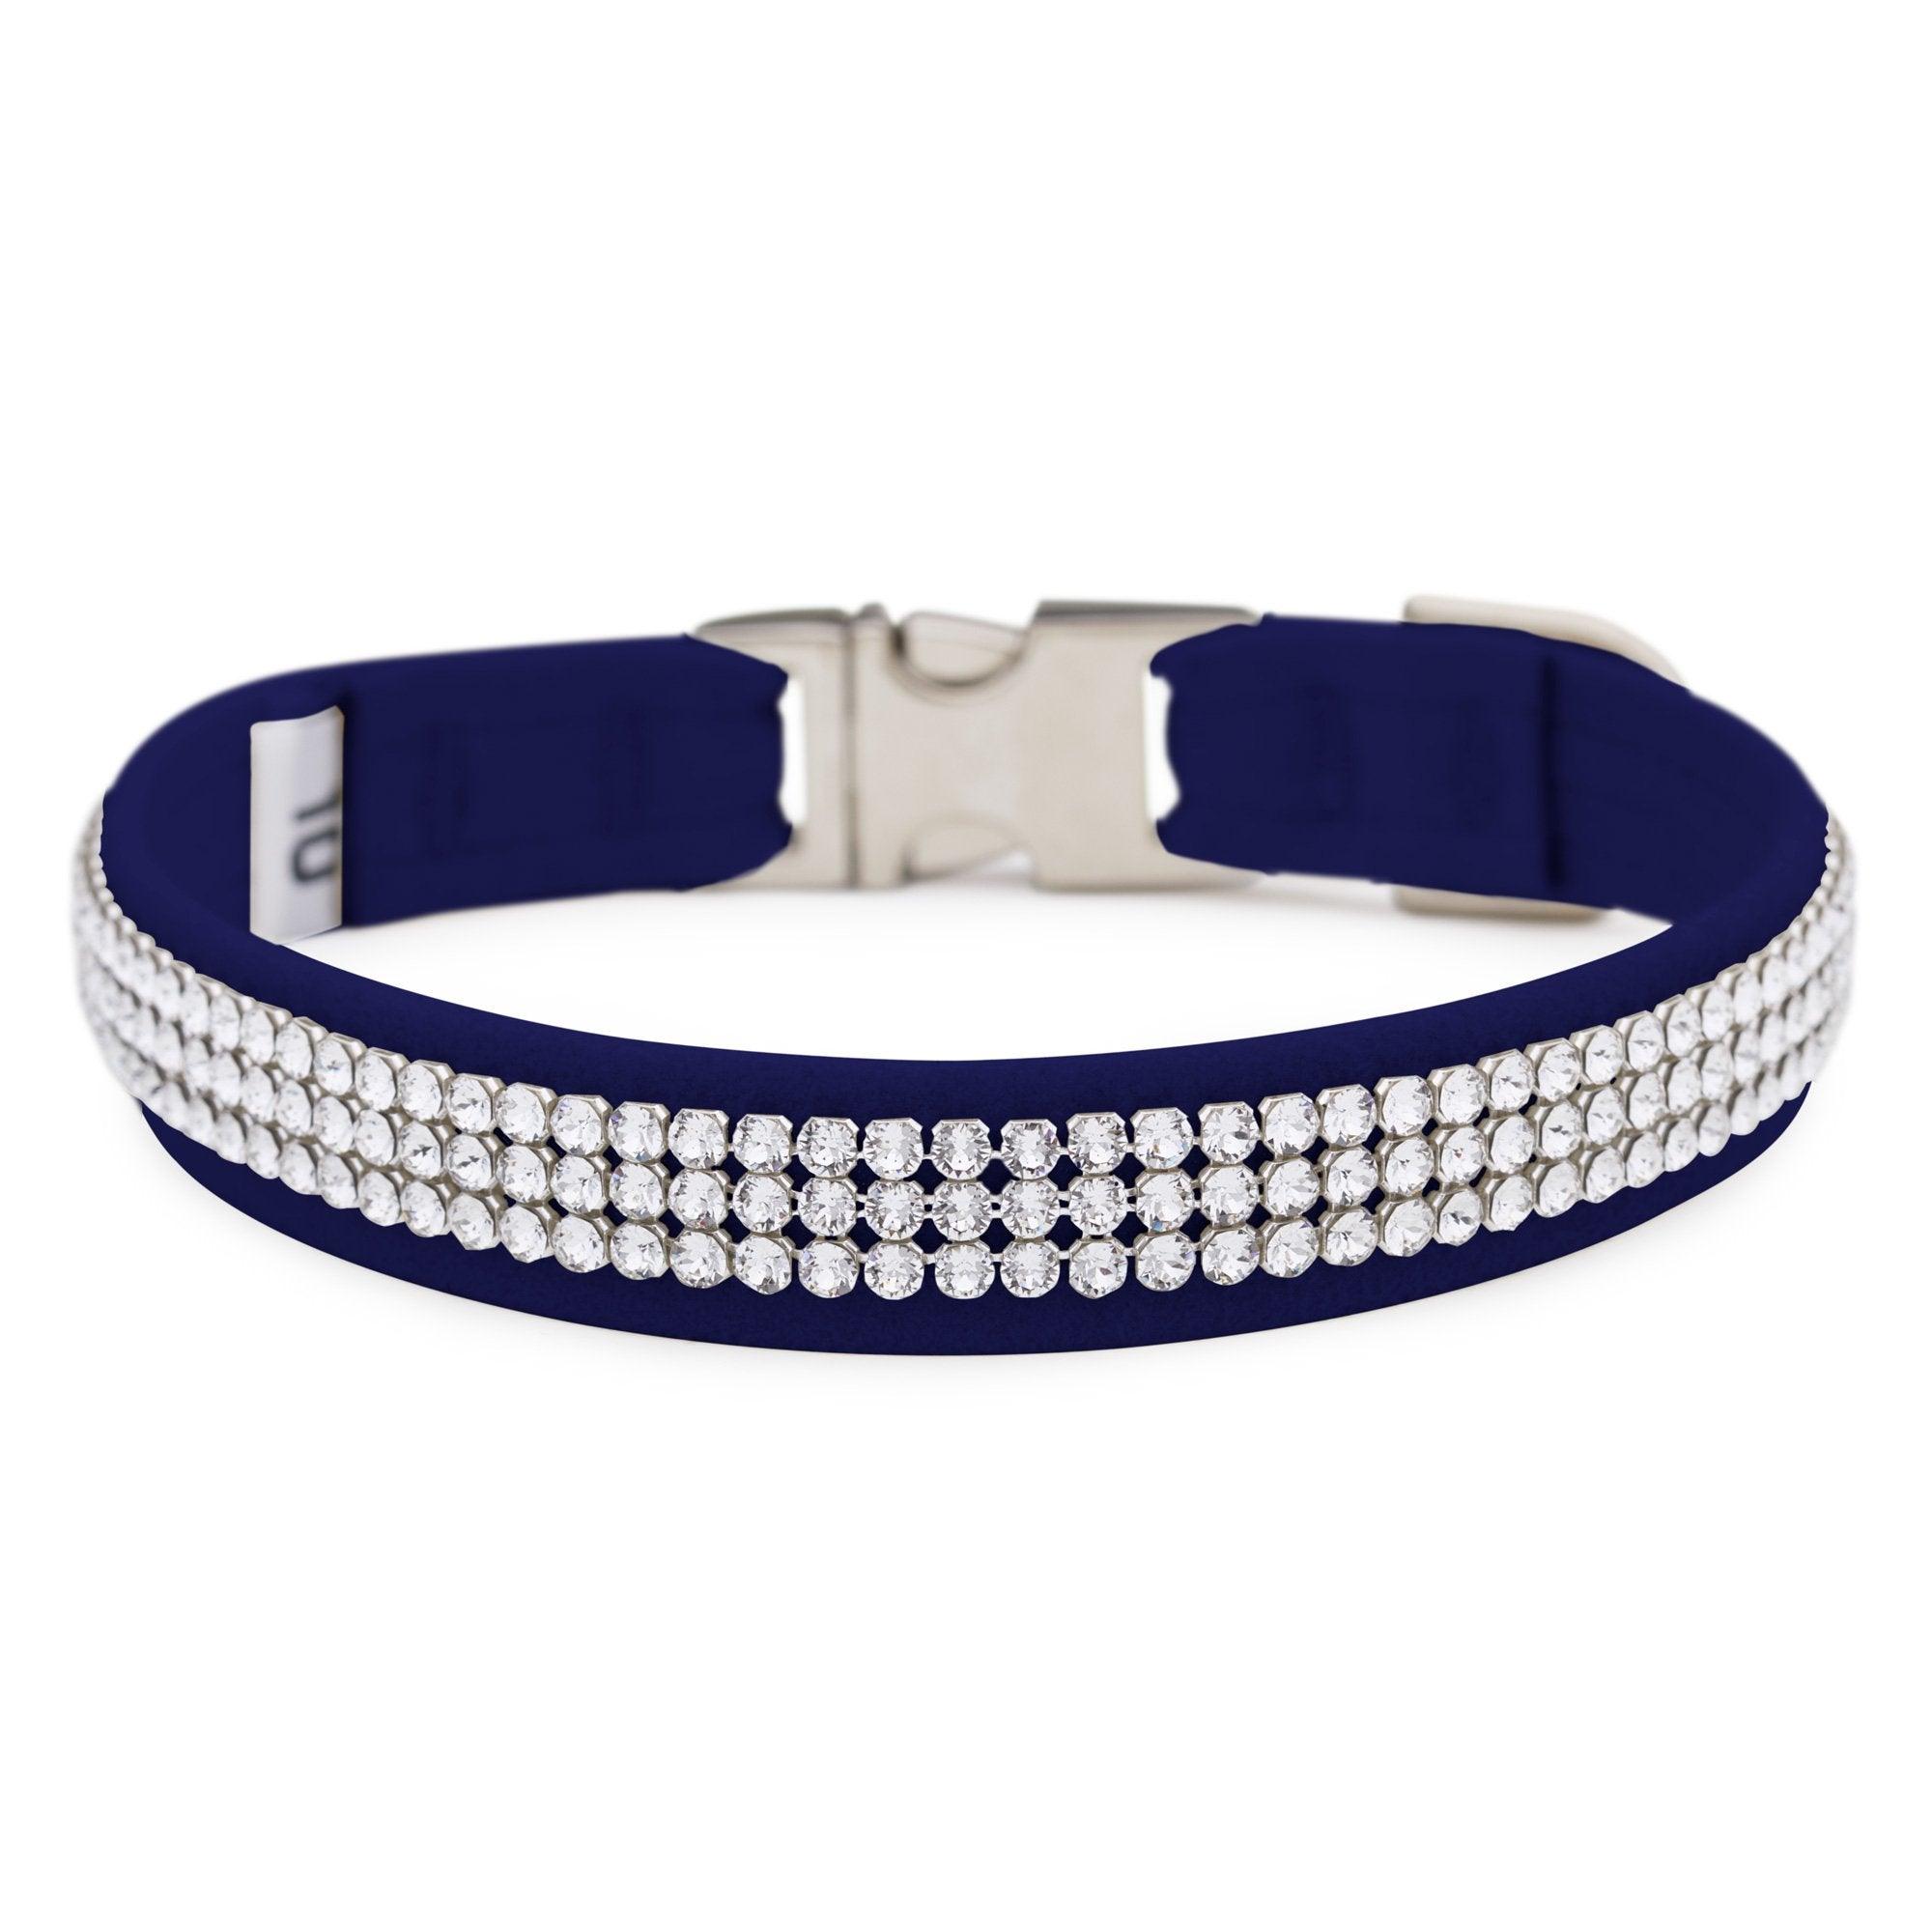 Indigo 3 Row Giltmore Perfect Fit Collar - Rocky & Maggie's Pet Boutique and Salon